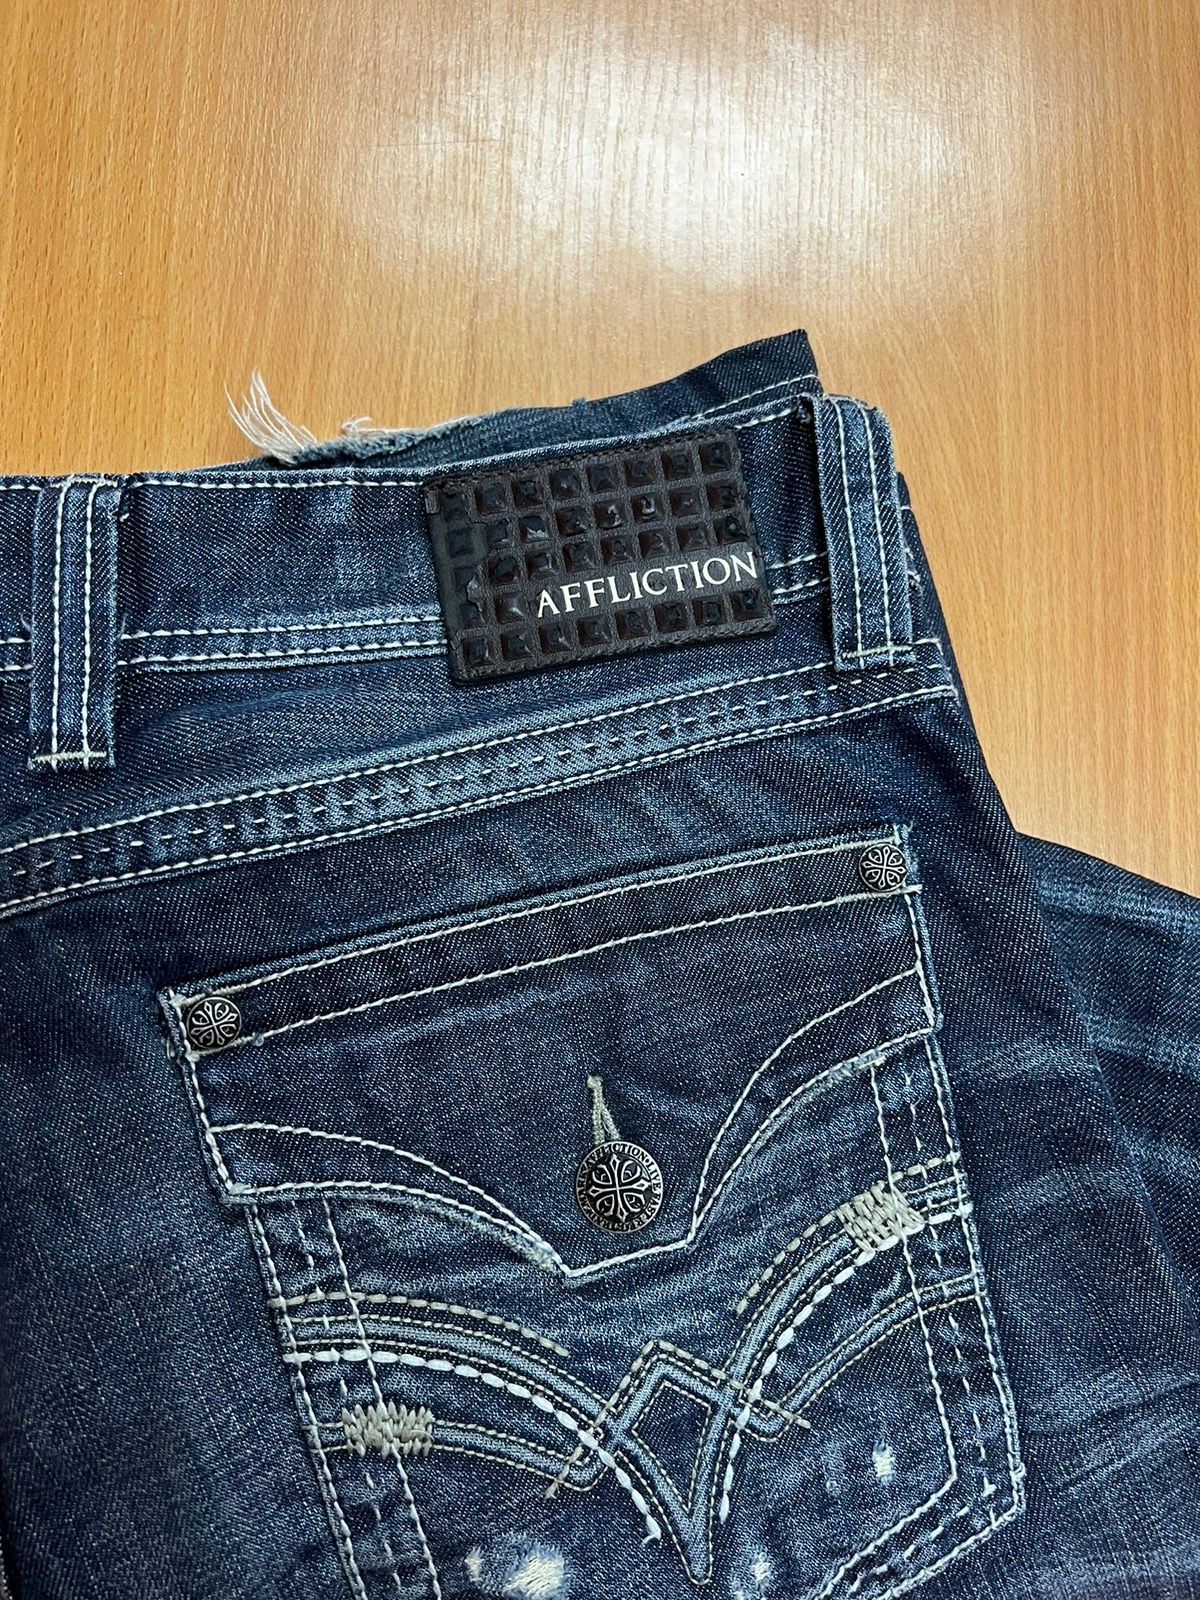 True Religion 🪦RARE DISTRESSED AFFLICTION LOS ANGELES JEANS | Grailed